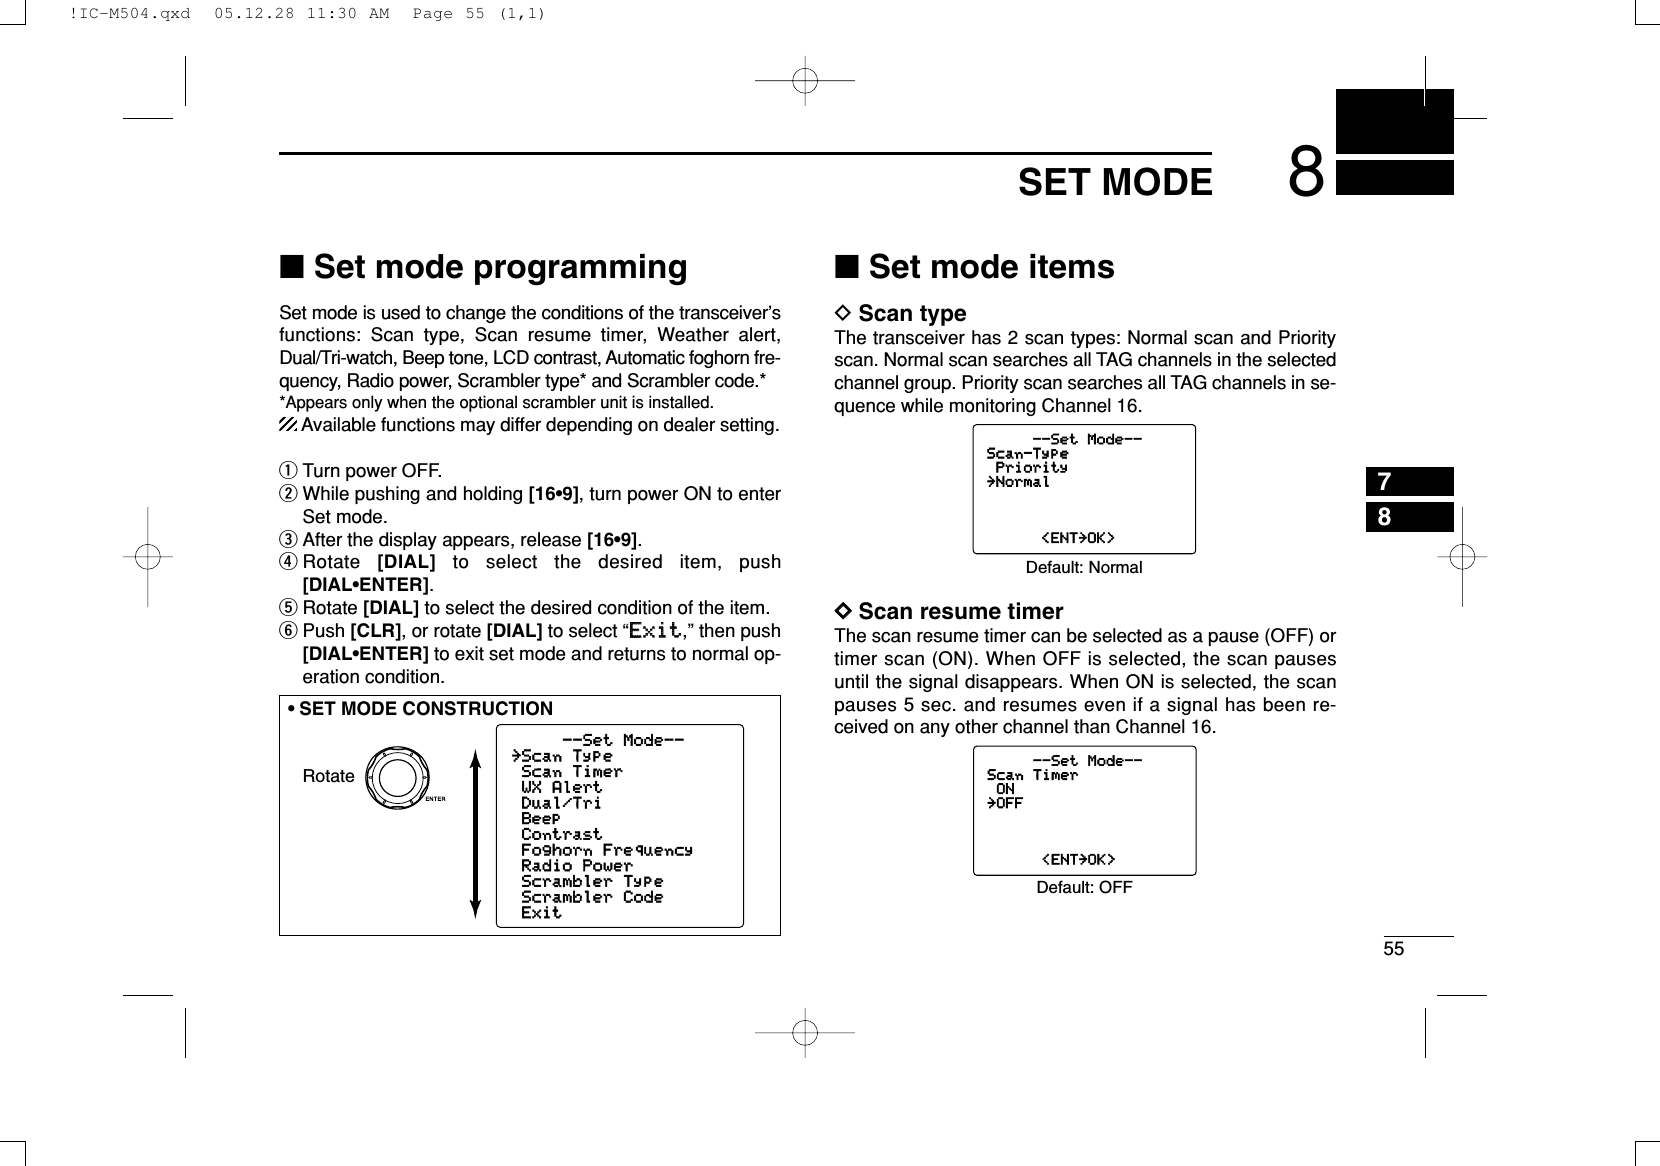 558SET MODE78■Set mode programmingSet mode is used to change the conditions of the transceiver’sfunctions: Scan type, Scan resume timer, Weather alert,Dual/Tri-watch, Beep tone, LCD contrast, Automatic foghorn fre-quency, Radio power, Scrambler type* and Scrambler code.**Appears only when the optional scrambler unit is installed.Available functions may differ depending on dealer setting.qTurn power OFF.wWhile pushing and holding [16•9], turn power ON to enterSet mode.eAfter the display appears, release [16•9].rRotate  [DIAL] to select the desired item, push[DIAL•ENTER].tRotate [DIAL] to select the desired condition of the item.yPush [CLR], or rotate [DIAL] to select “EExxiitt,” then push[DIAL•ENTER] to exit set mode and returns to normal op-eration condition.■Set mode itemsDScan typeThe transceiver has 2 scan types: Normal scan and Priorityscan. Normal scan searches all TAG channels in the selectedchannel group. Priority scan searches all TAG channels in se-quence while monitoring Channel 16.DDScan resume timerThe scan resume timer can be selected as a pause (OFF) ortimer scan (ON). When OFF is selected, the scan pausesuntil the signal disappears. When ON is selected, the scanpauses 5 sec. and resumes even if a signal has been re-ceived on any other channel than Channel 16.--Set Mode--Scan TimerON˘OFF&lt;ENT˘OK&gt;Default: OFF--Set Mode--Scan-TypePriority˘Normal&lt;ENT˘OK&gt;Default: NormalRotate--Set Mode--˘Scan TypeScan TimerWX AlertDual/TriBeepContrastFoghorn FrequencyRadio PowerScrambler TypeScrambler CodeExit•SET MODE CONSTRUCTION!IC-M504.qxd  05.12.28 11:30 AM  Page 55 (1,1)